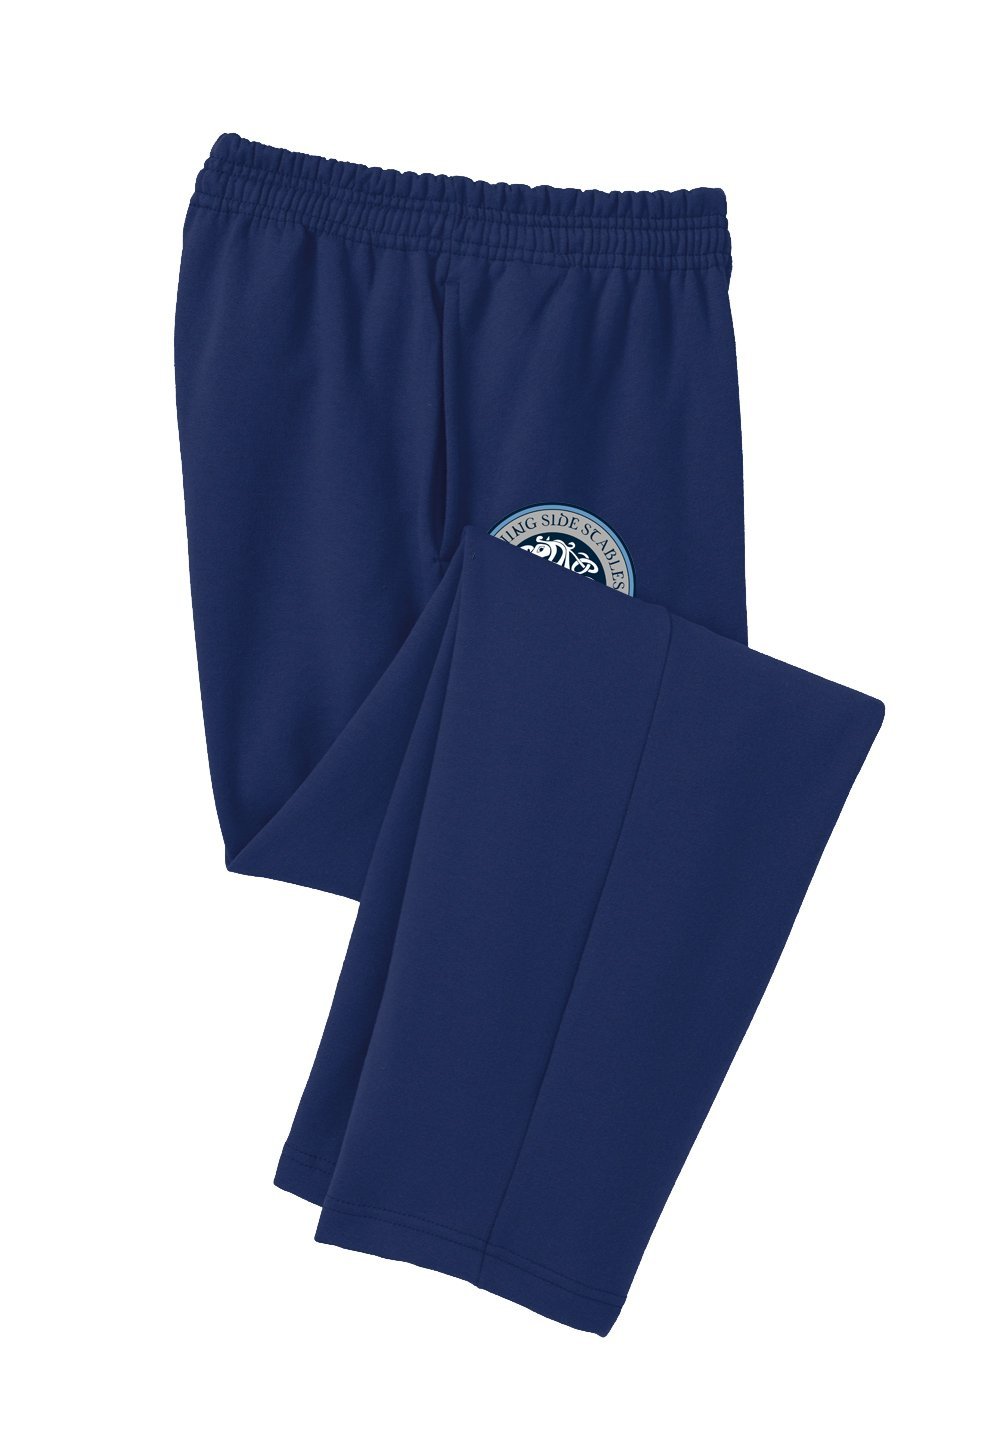 Morning Side Stables Core Fleece Sweatpant with Pockets - Adult Unisex + Youth Sizes